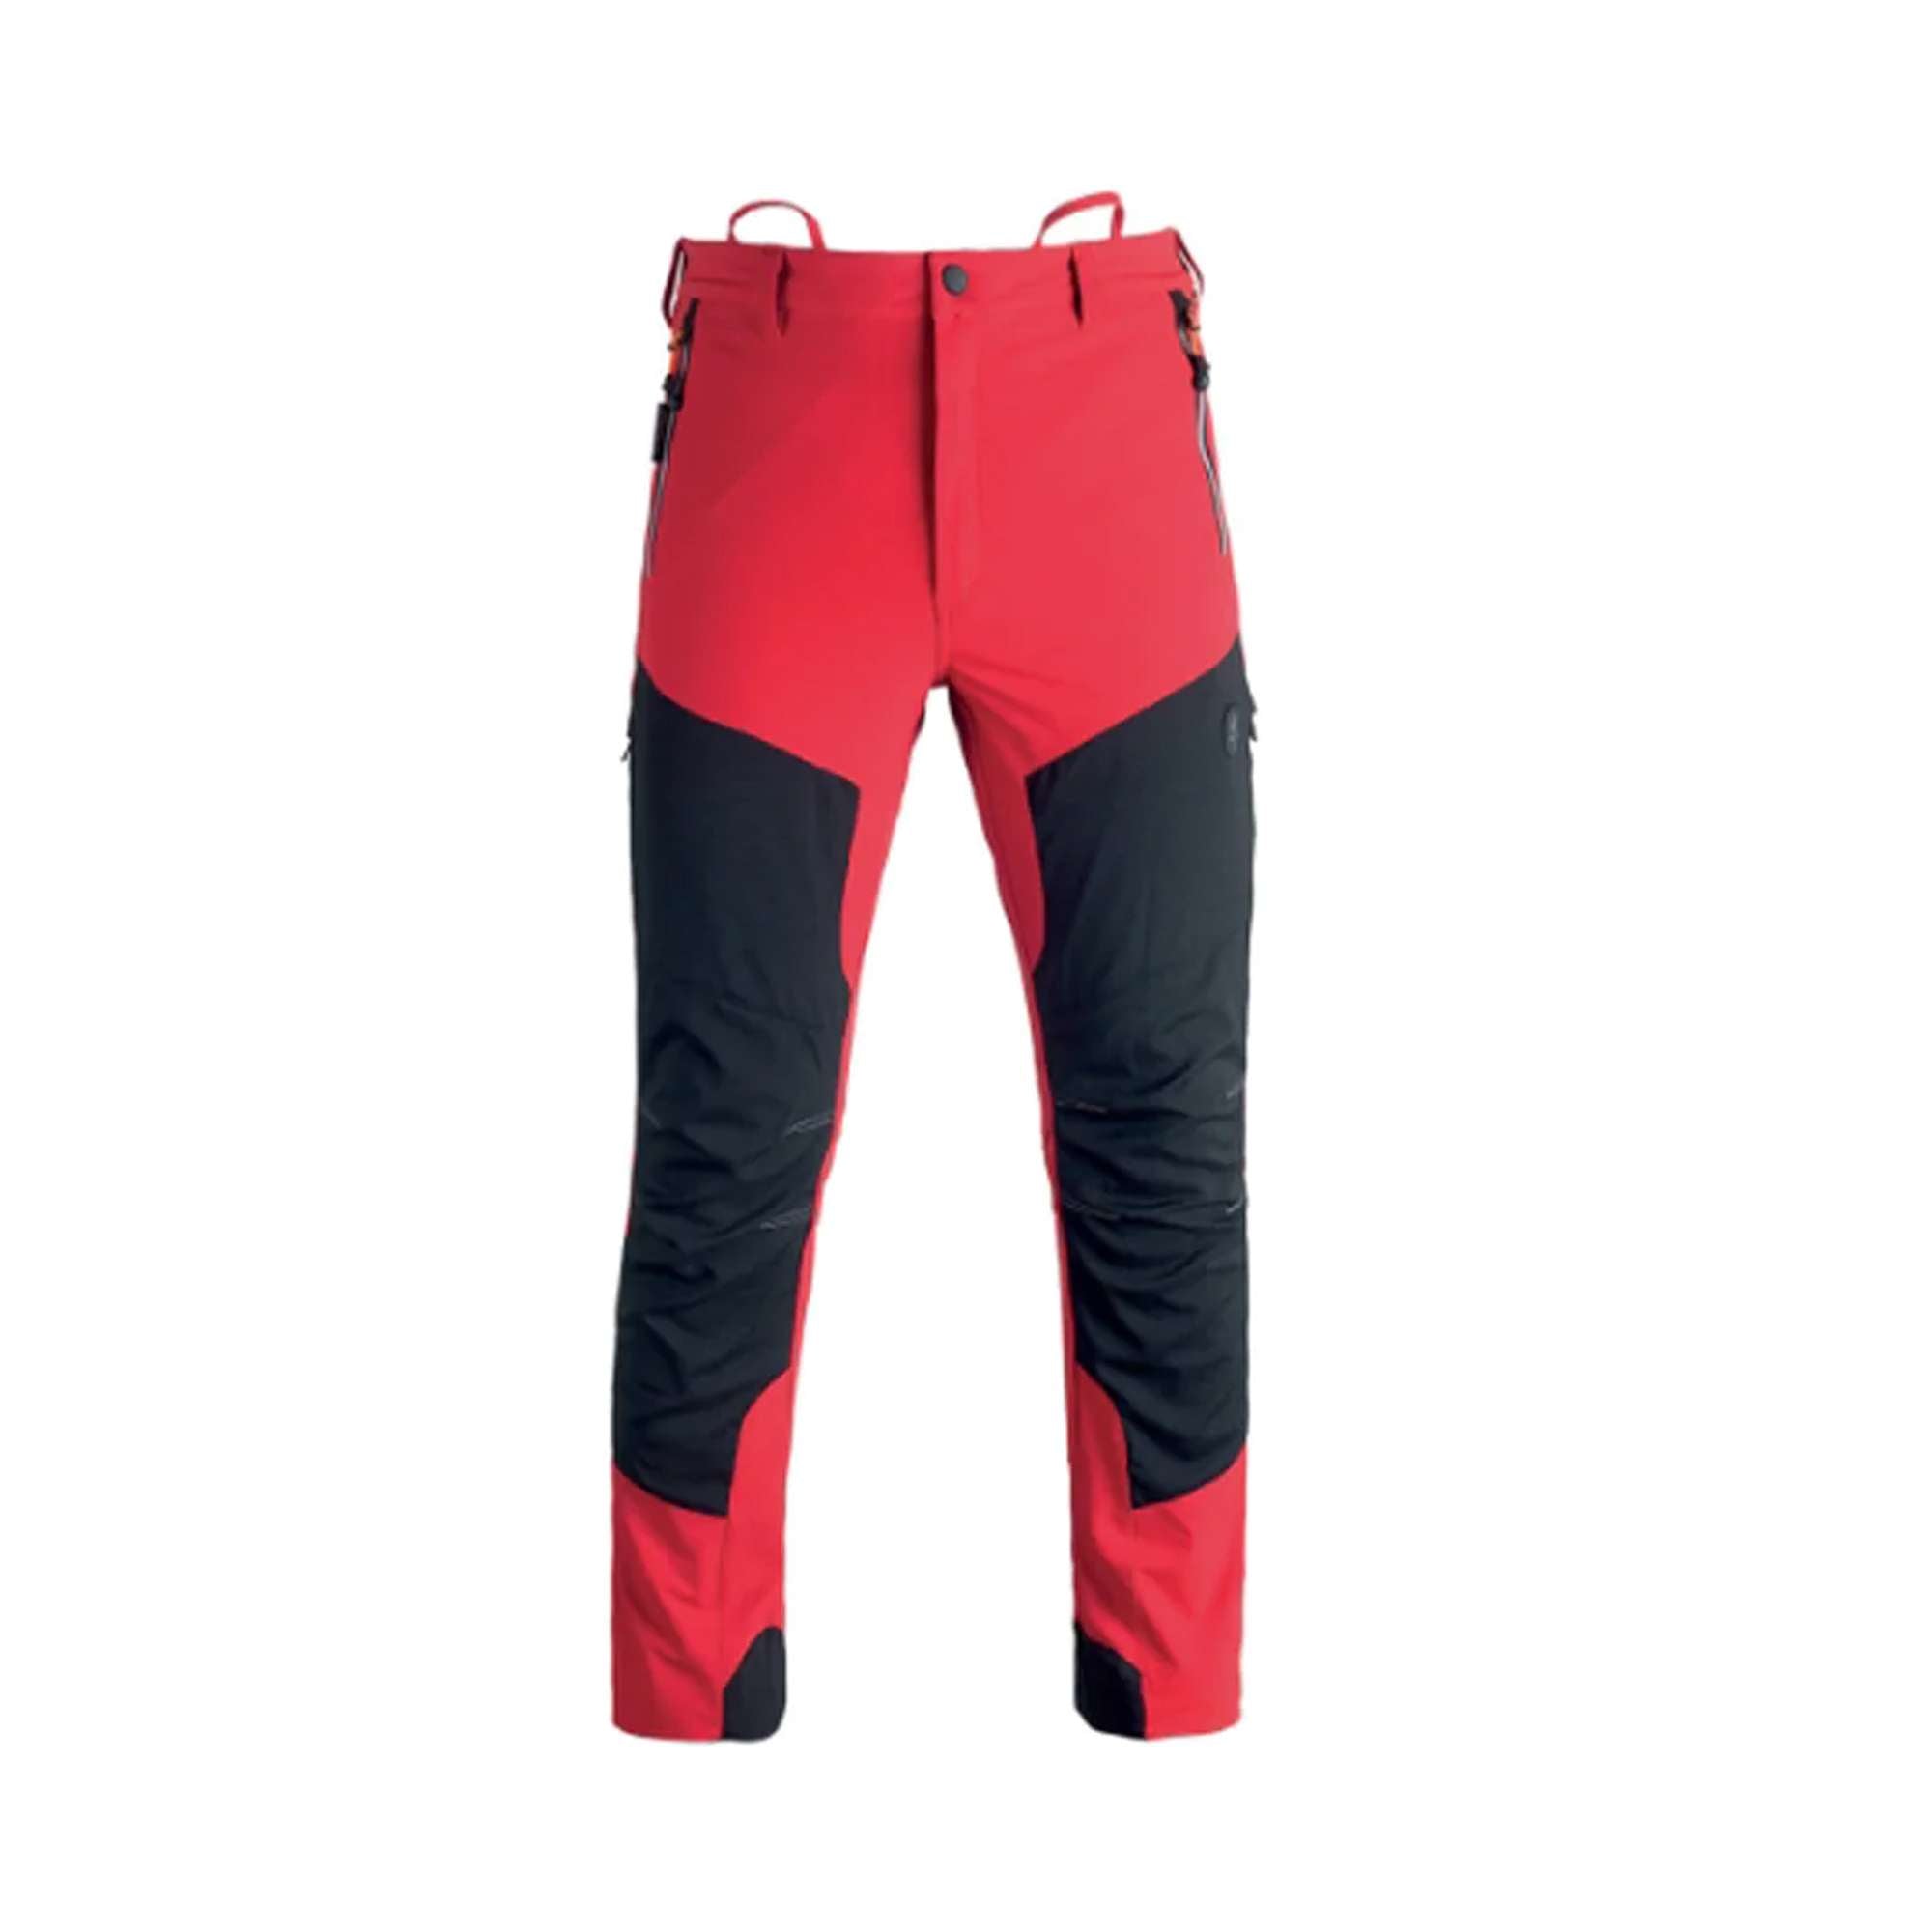 Work pants, stretch fabric and water repellent, Red color - Kapriol